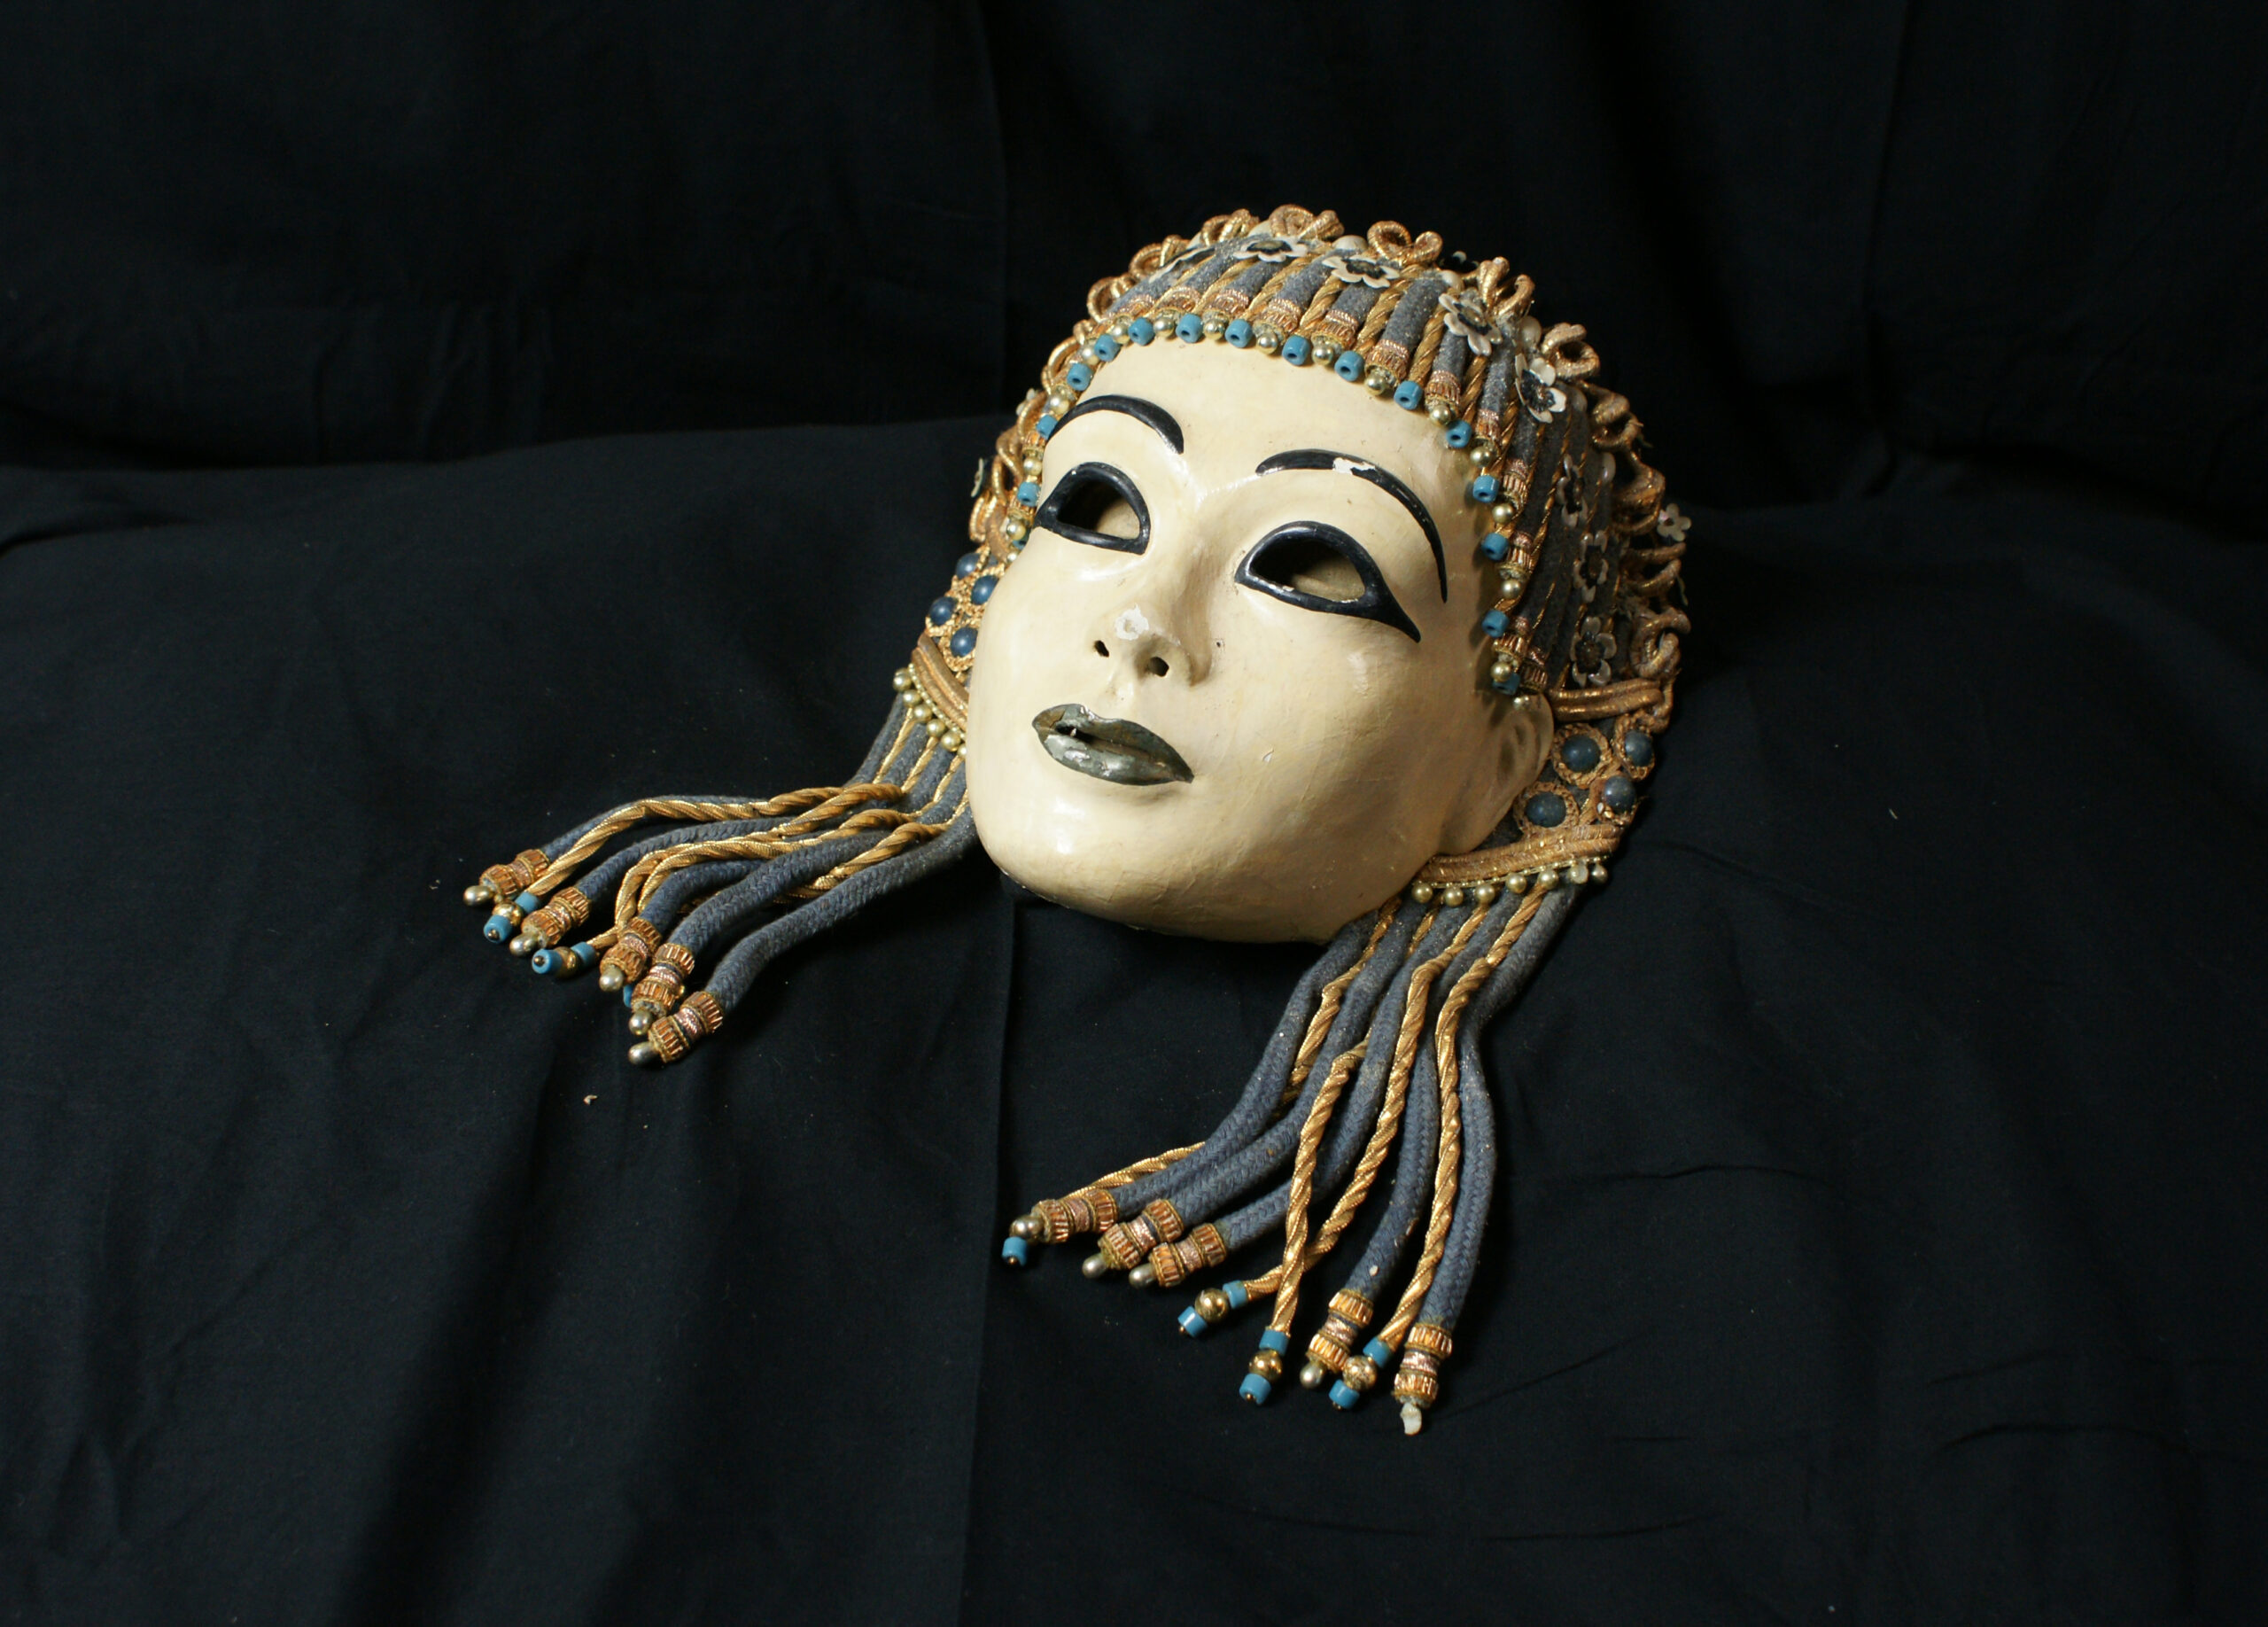 a headdress by Oliver Messel, fashioned from twisted wire pendants and painted paper worn by Vivien Leigh in George Cukor’s 1946 ration-stricken film of Caesar and Cleopatra.